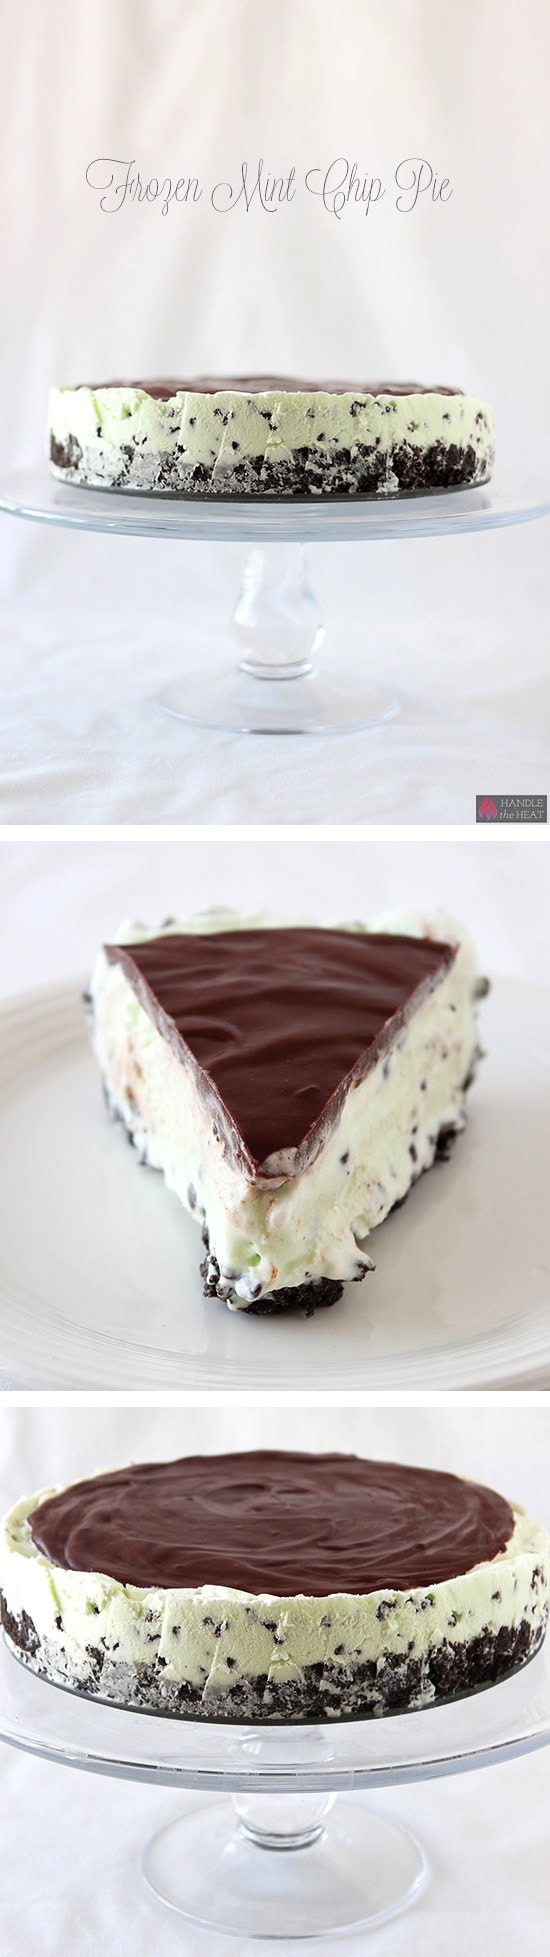 Frozen Mint Chocolate Chip Pie - perfect for summer!